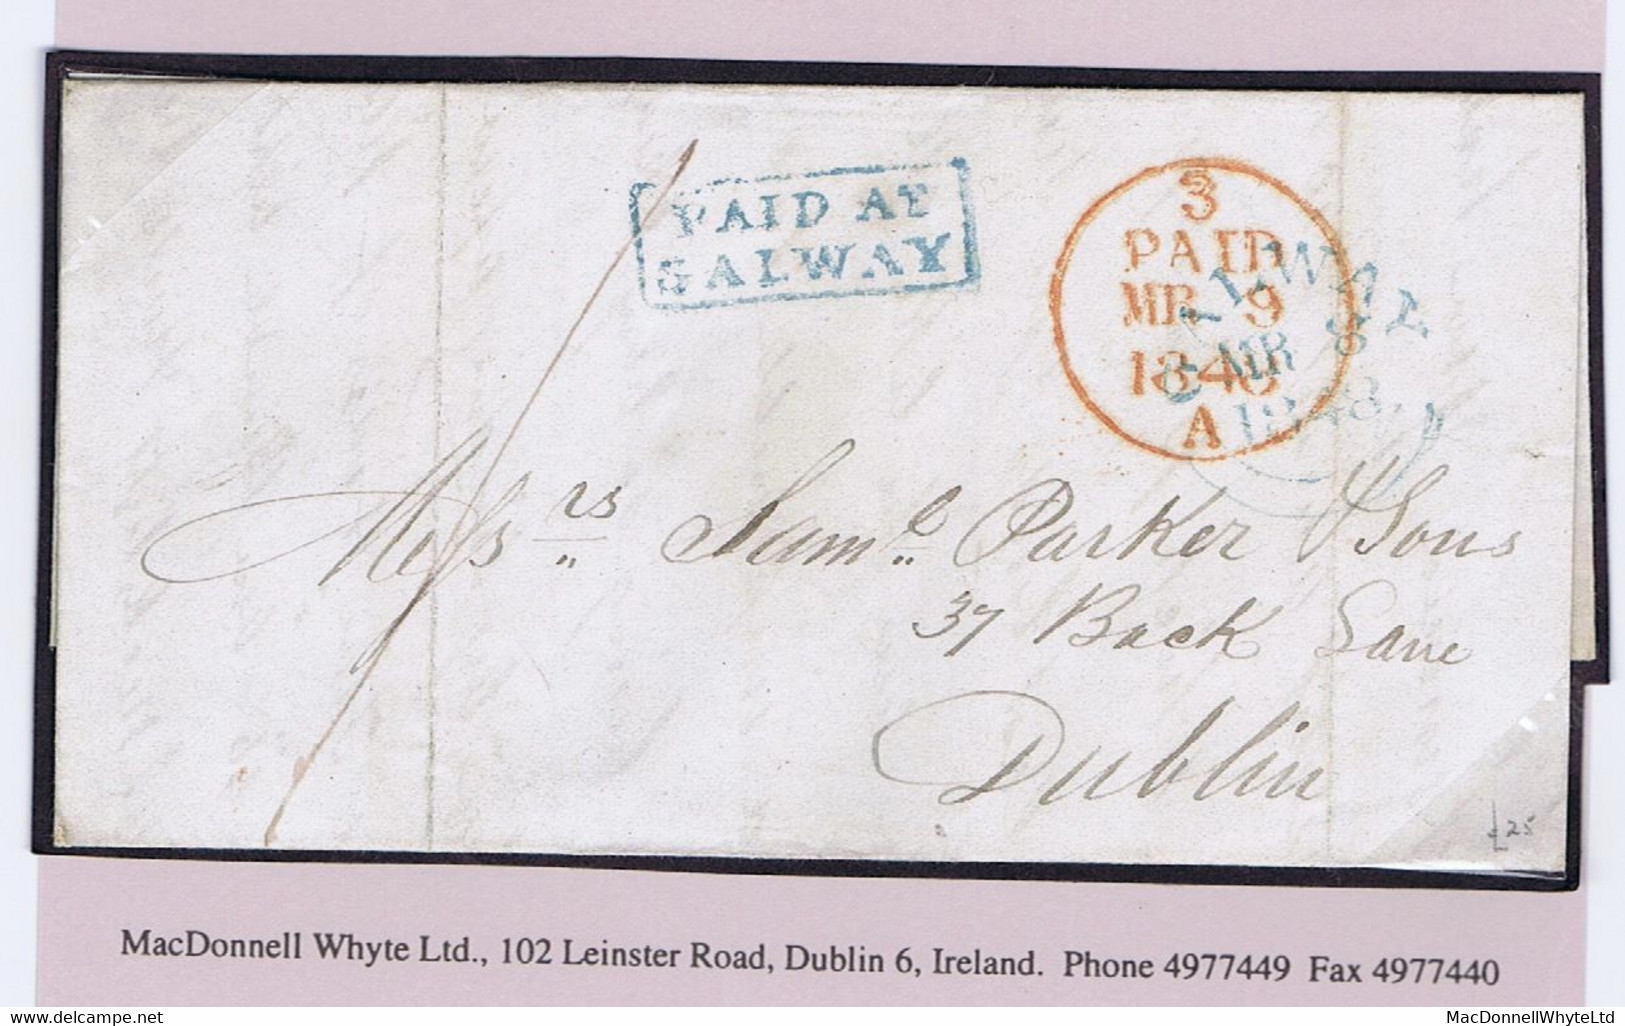 Ireland Galway 1848 Cover To Dublin Boxed 2-line PAID AT/GALWAY In Blue, Matching GALWAY MR 8 1848 Cds - Vorphilatelie